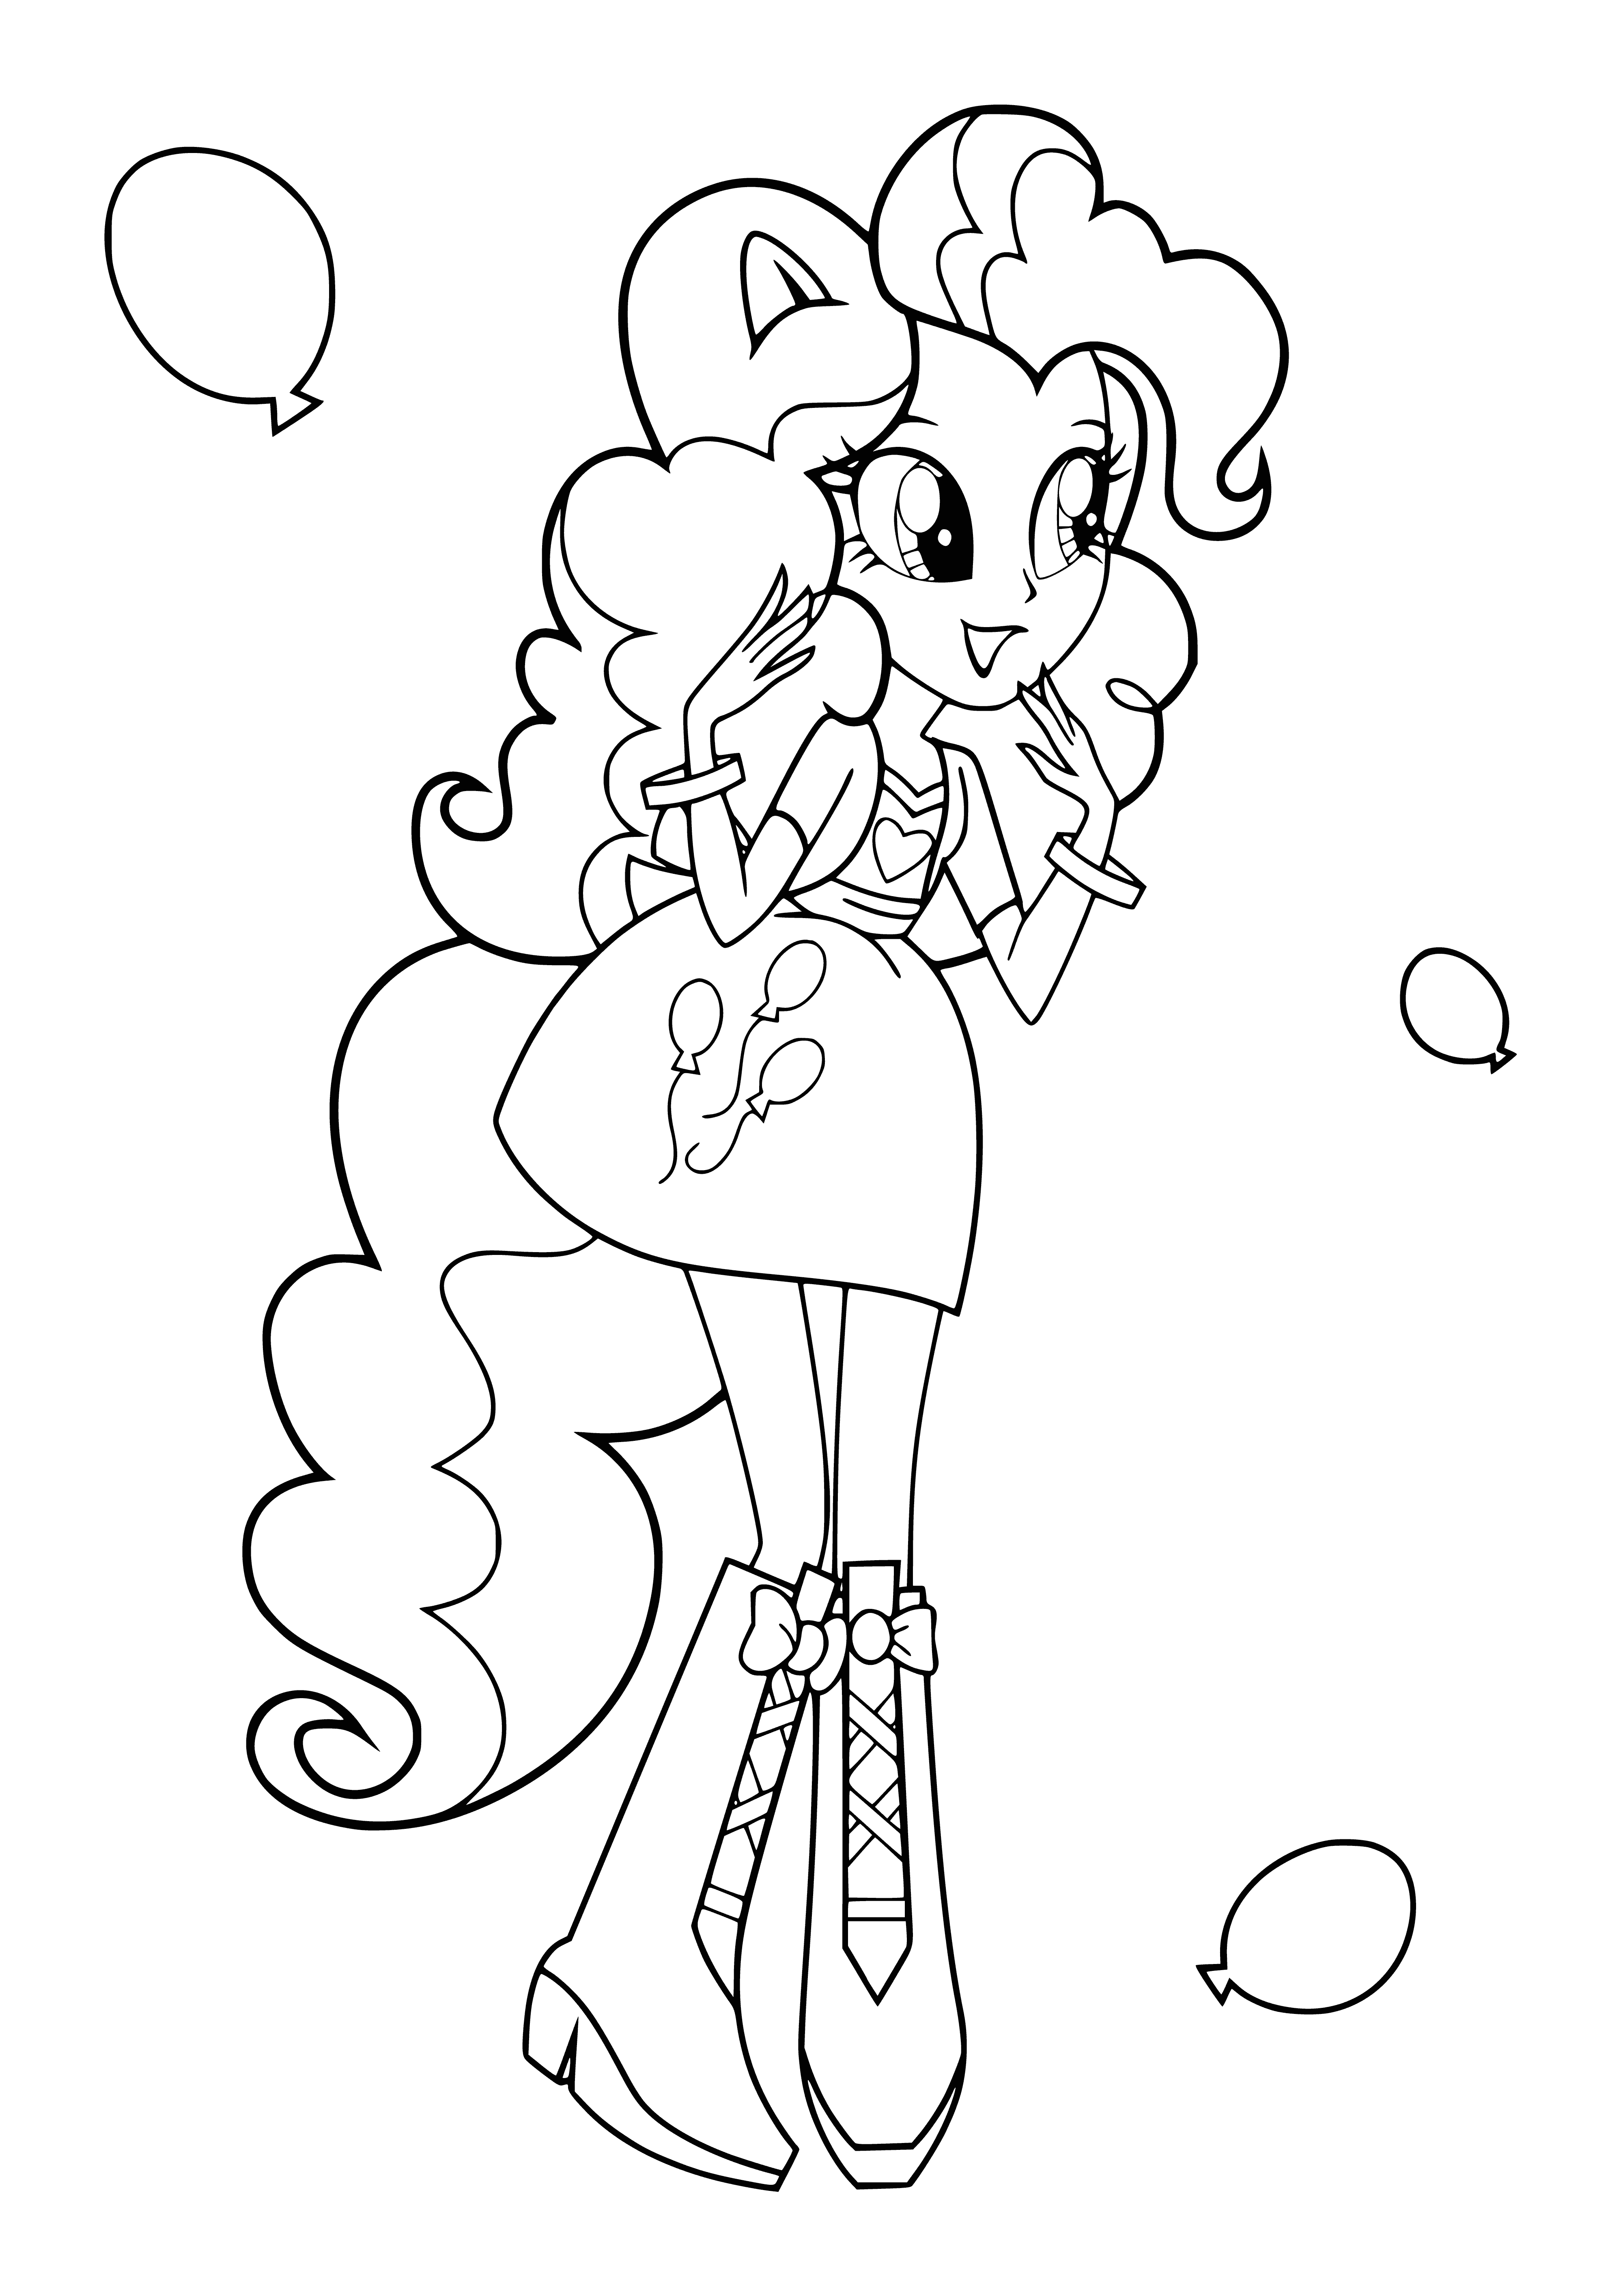 coloring page: Pinkie Pie is a pink pony with blue/white stripes, a blue ribbon, and a scarf. She stands on a checkered floor.